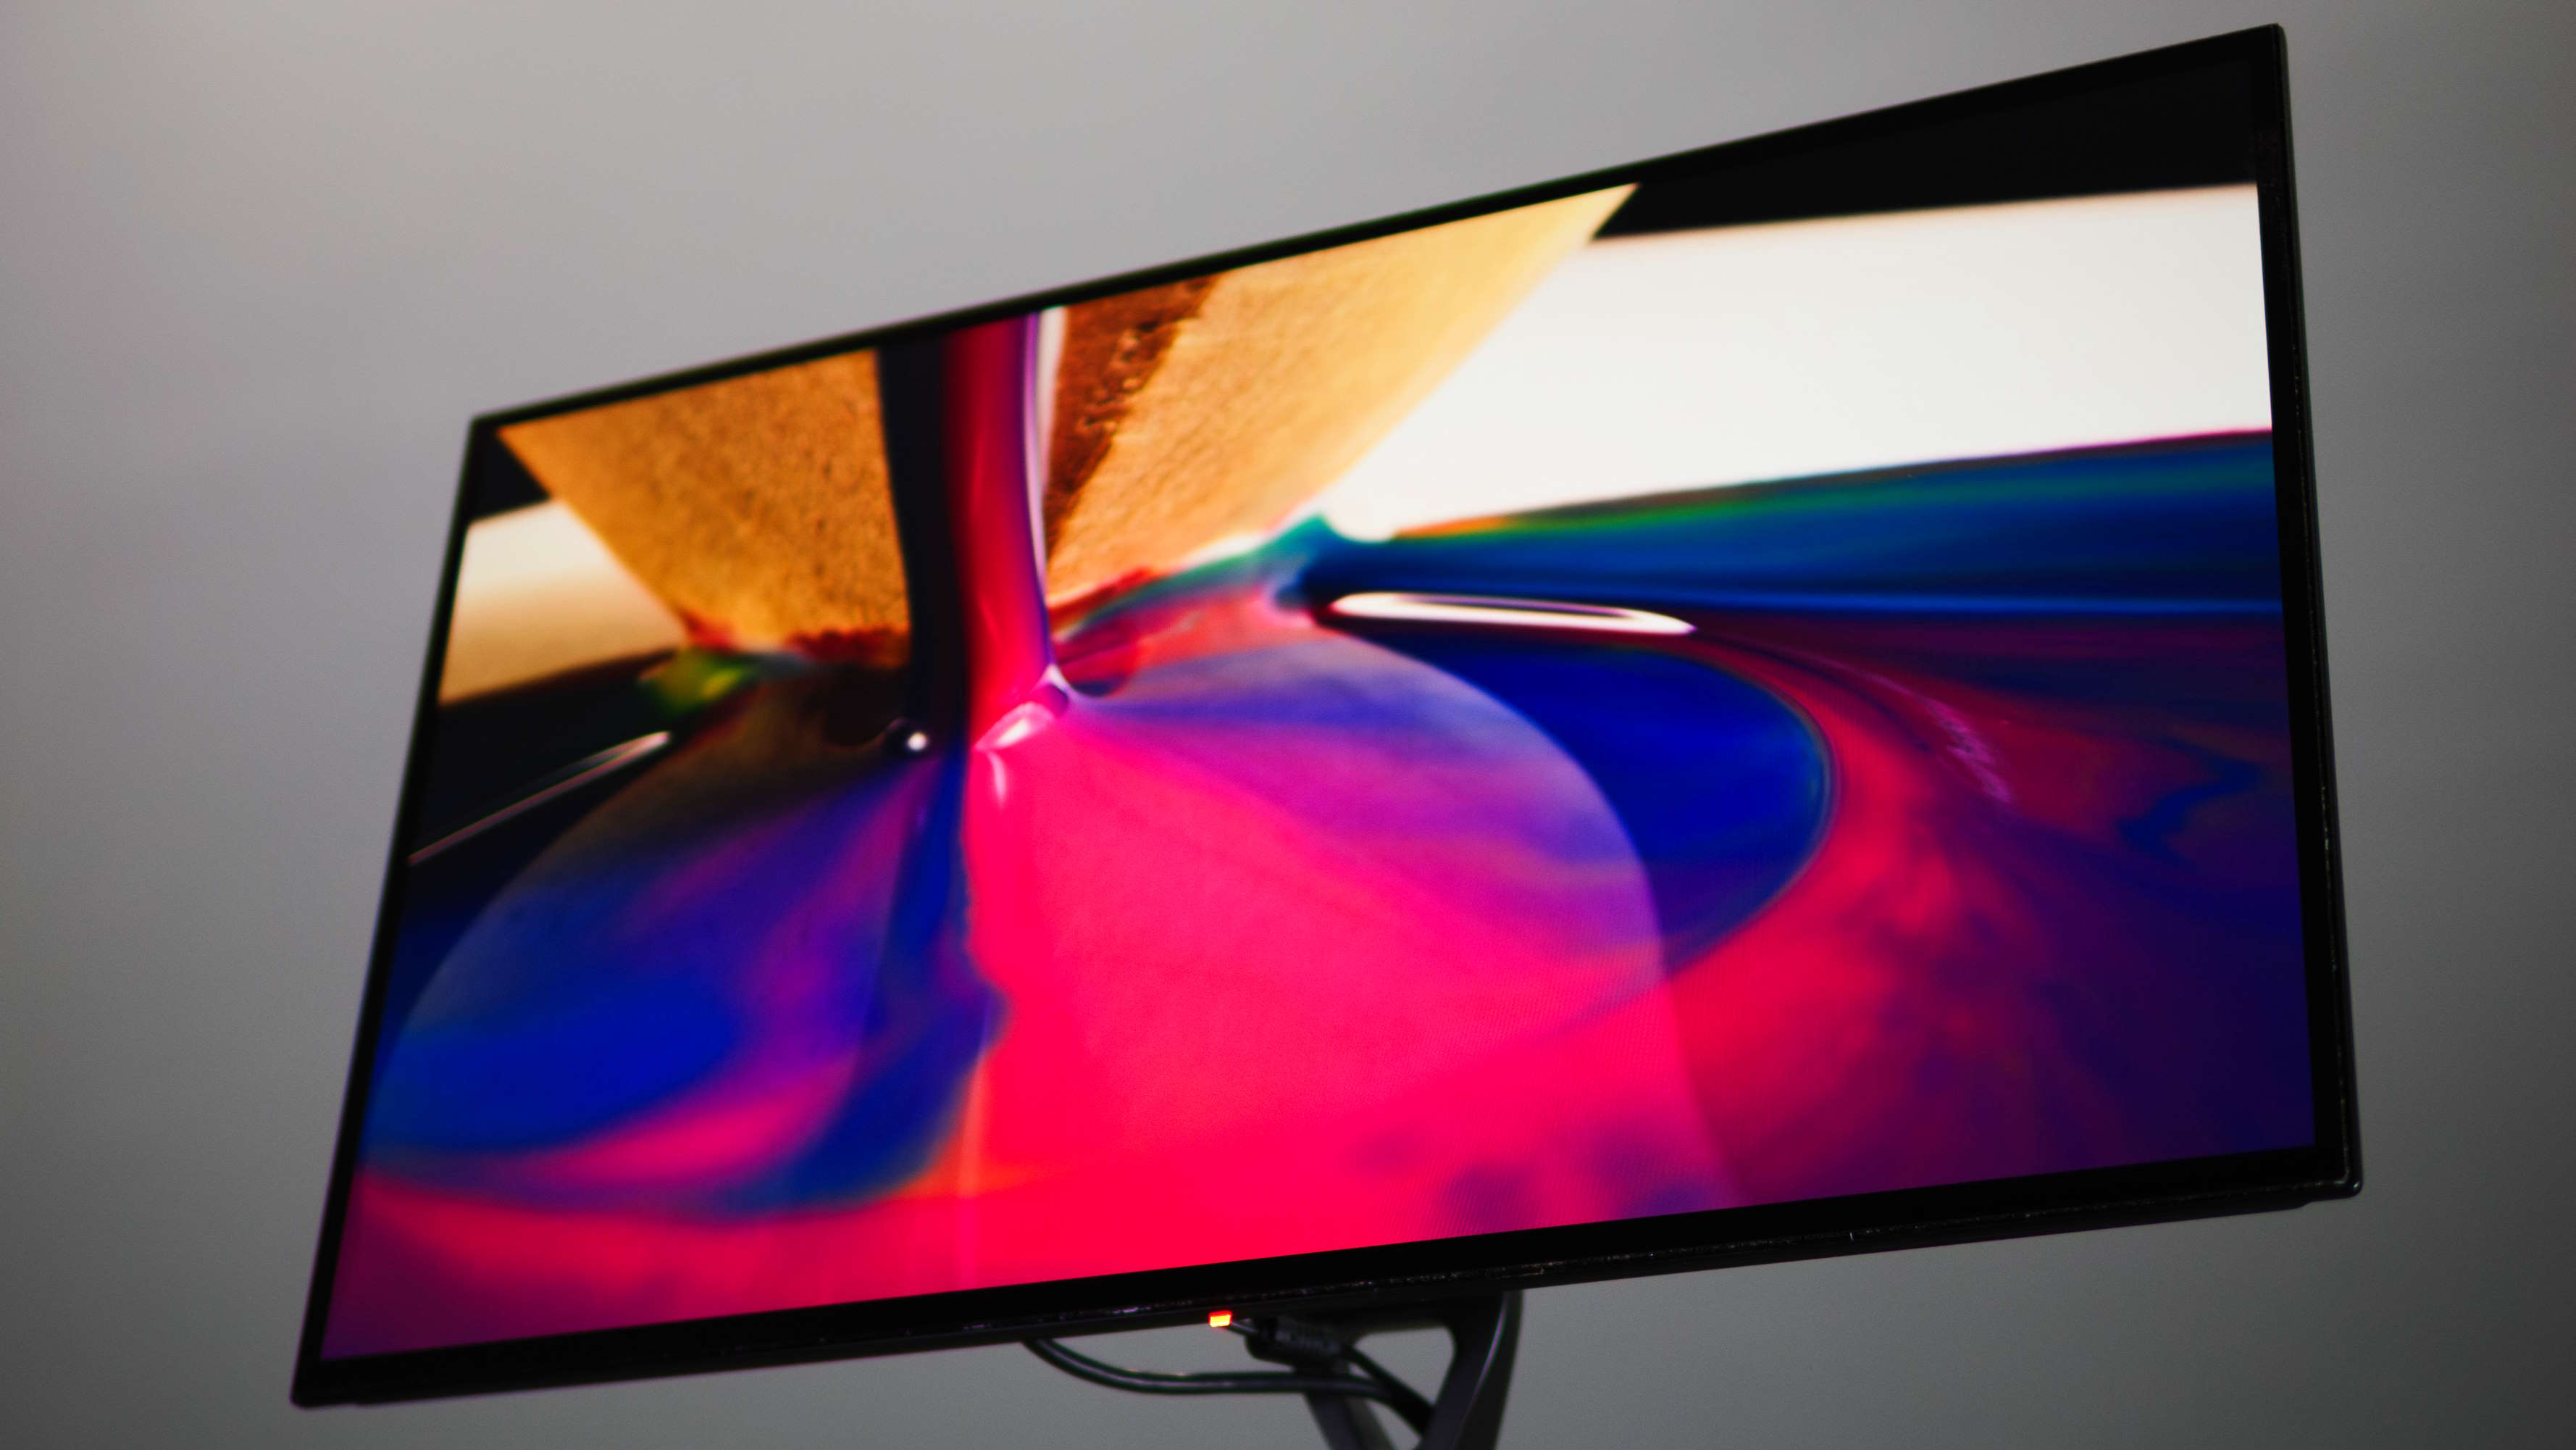 Best Monitor Deals: Save Up to $450 on Gaming and Work Monitors From  Samsung, LG and More - CNET